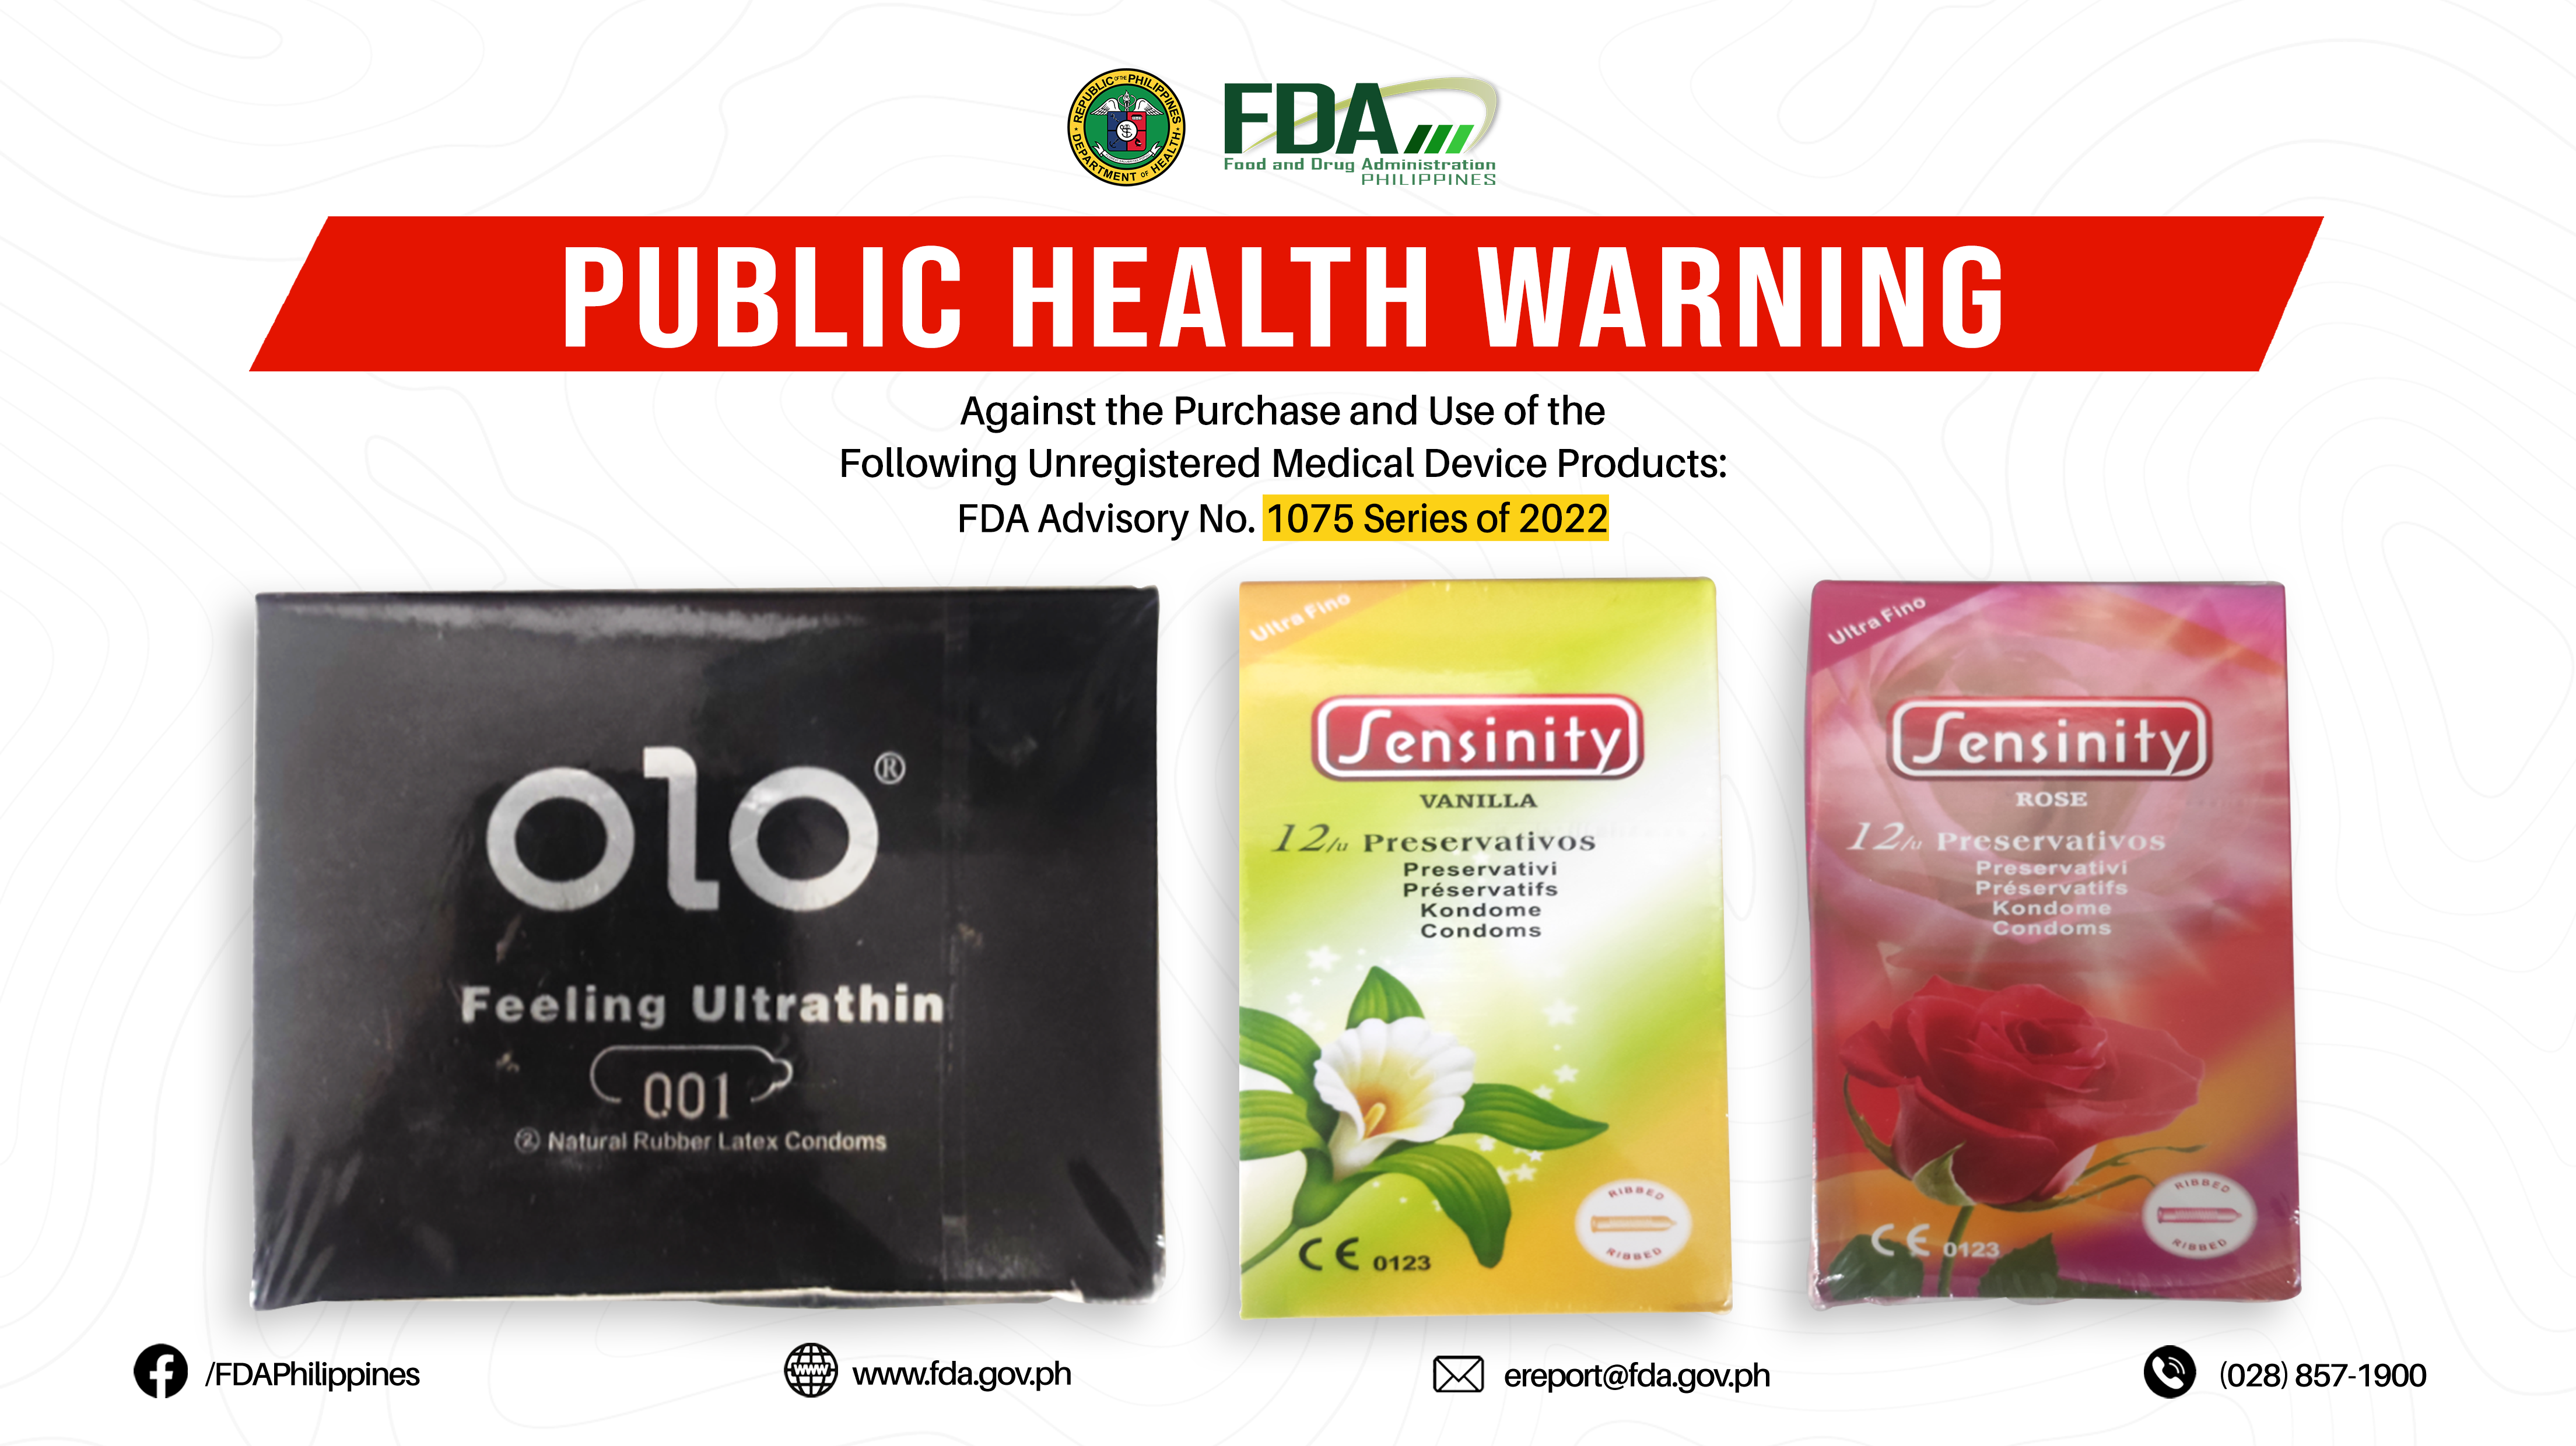 FDA Advisory No.2022-1075 || Public Health Warning Against the Purchase and Use of the Following Unregistered Medical Device Products: